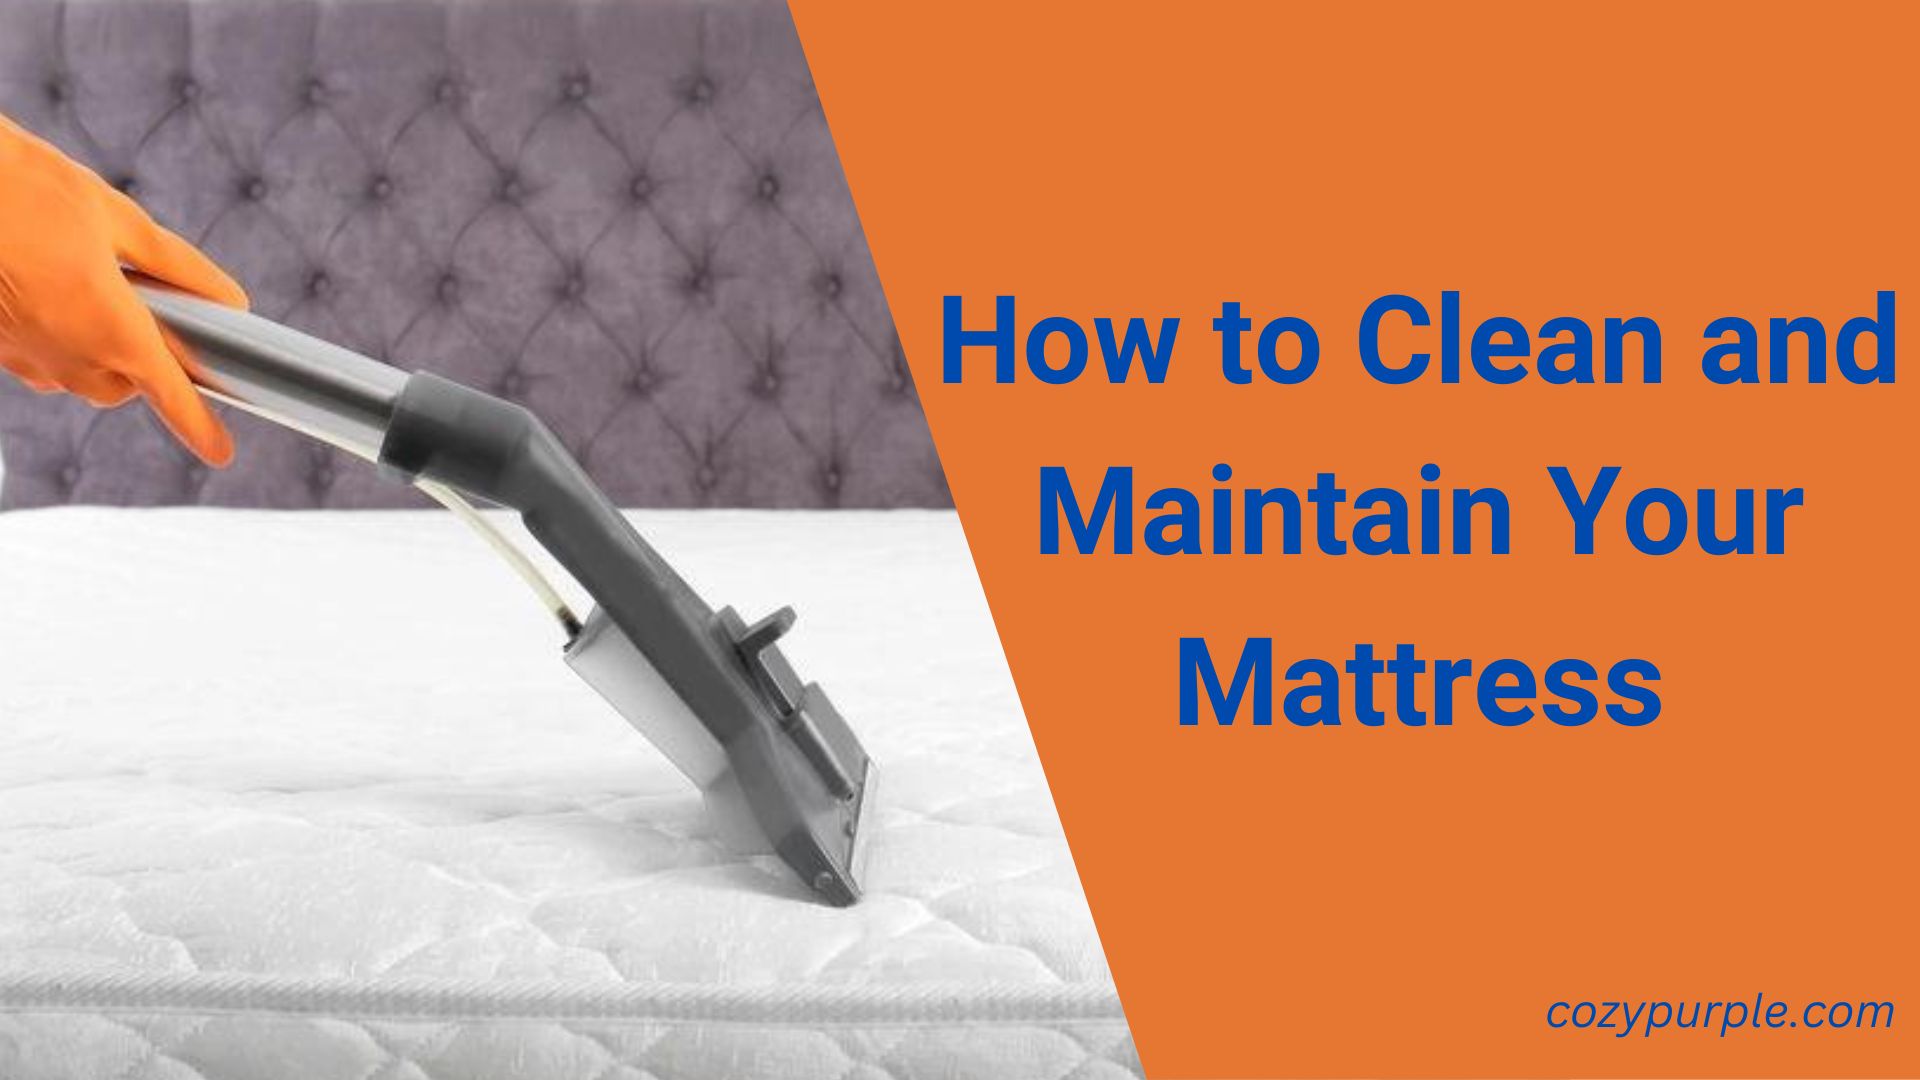 How to Clean and Maintain Your Mattress